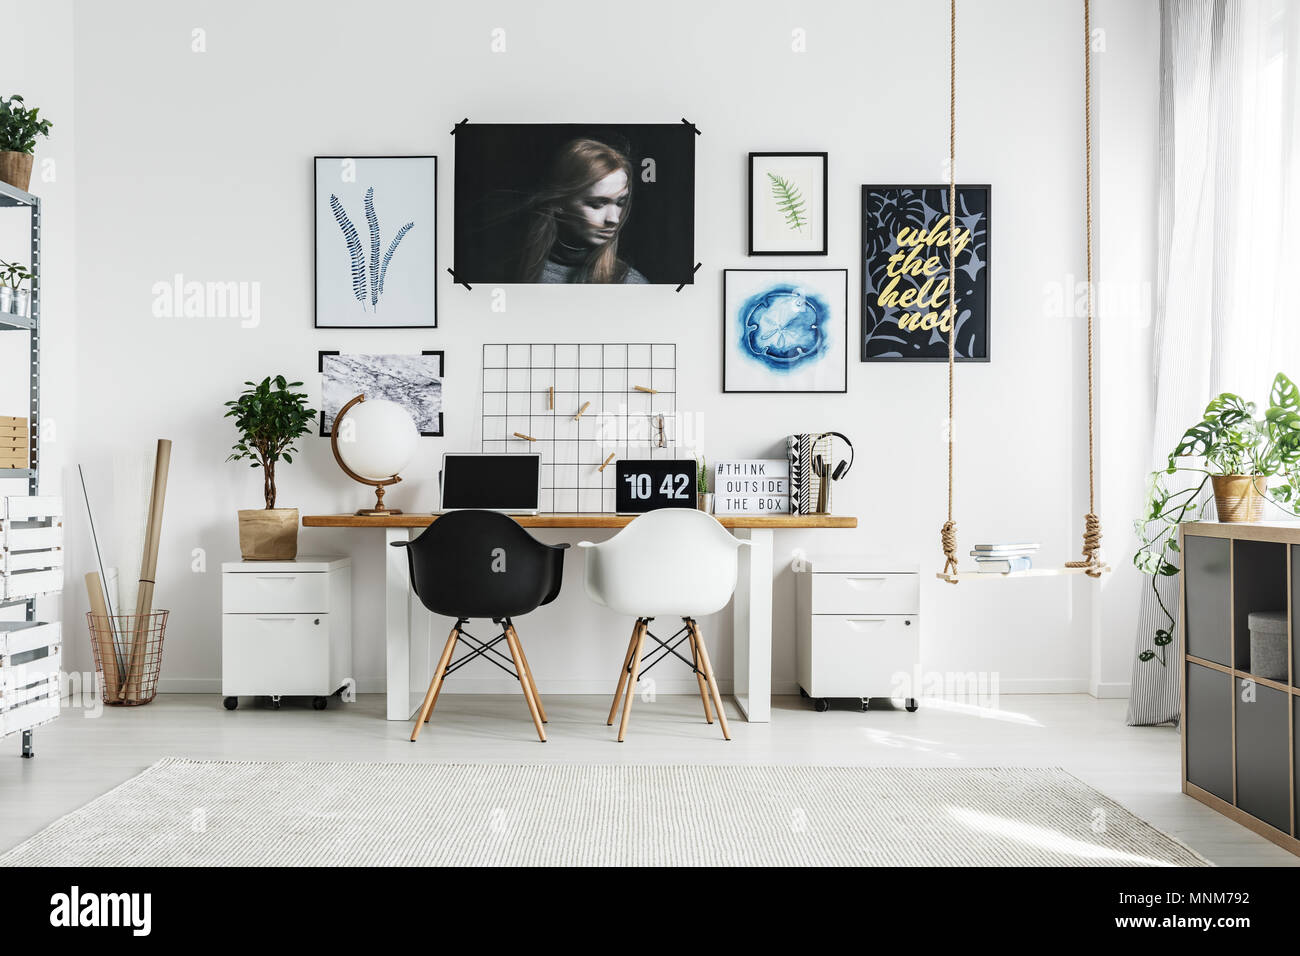 Creative Home Office With Double Desk And Two Chairs Stock Photo